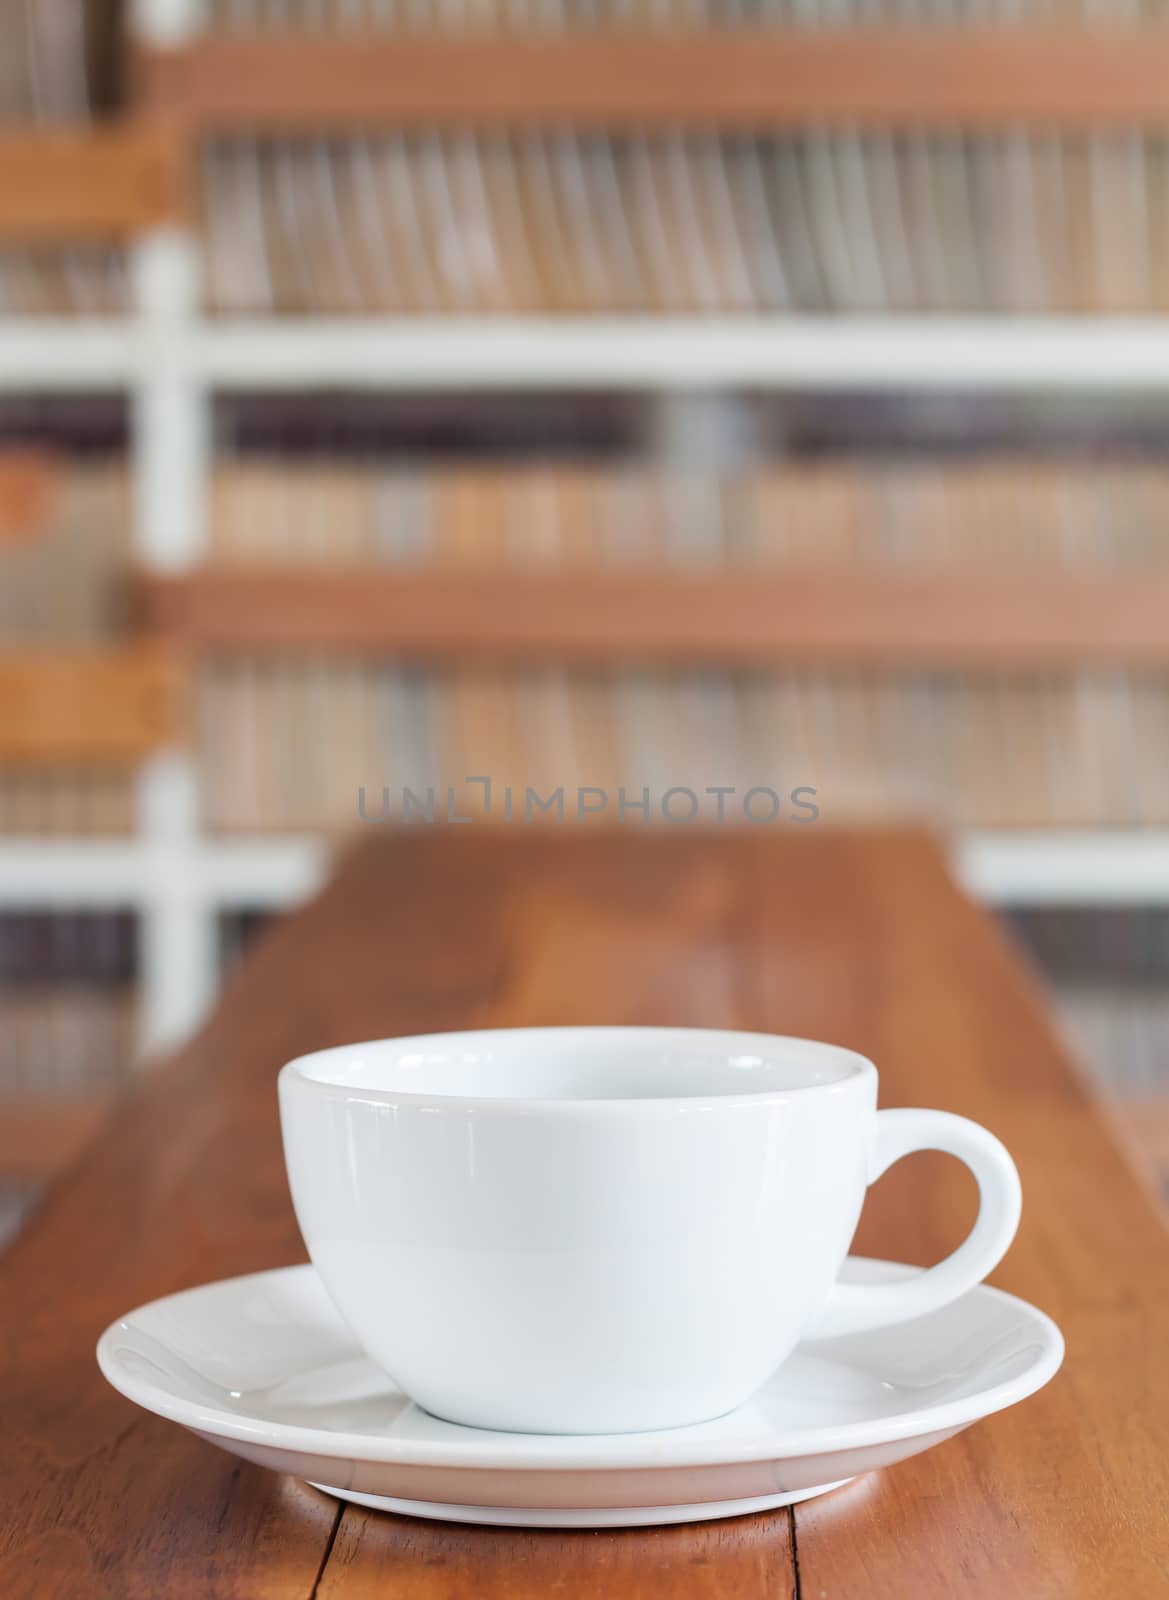 Coffee cup on wooden table by punsayaporn